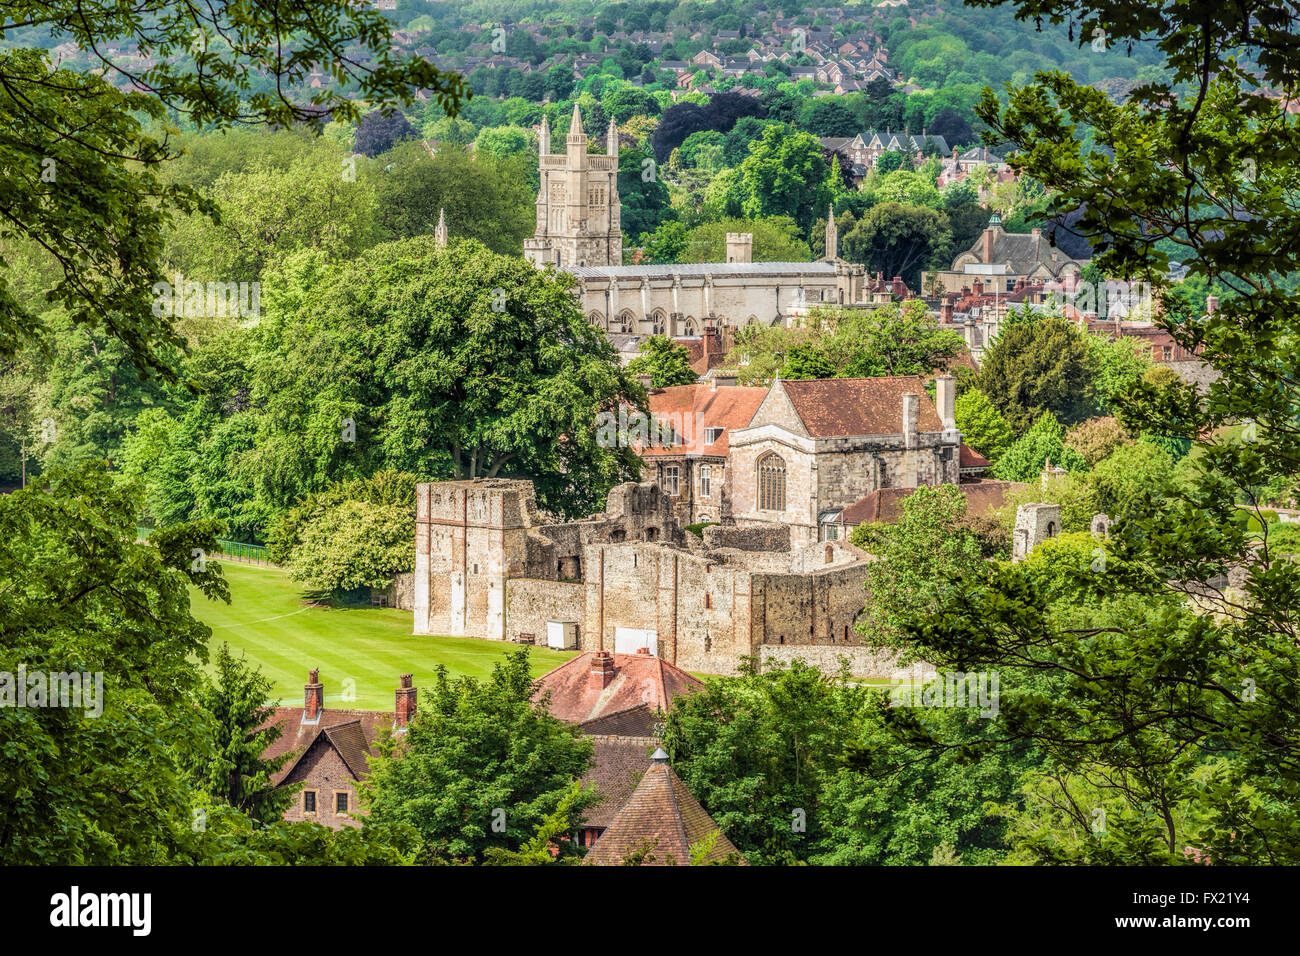 Distant view at Hospital of St Cross in Winchester, Hampshire, England Stock Photo